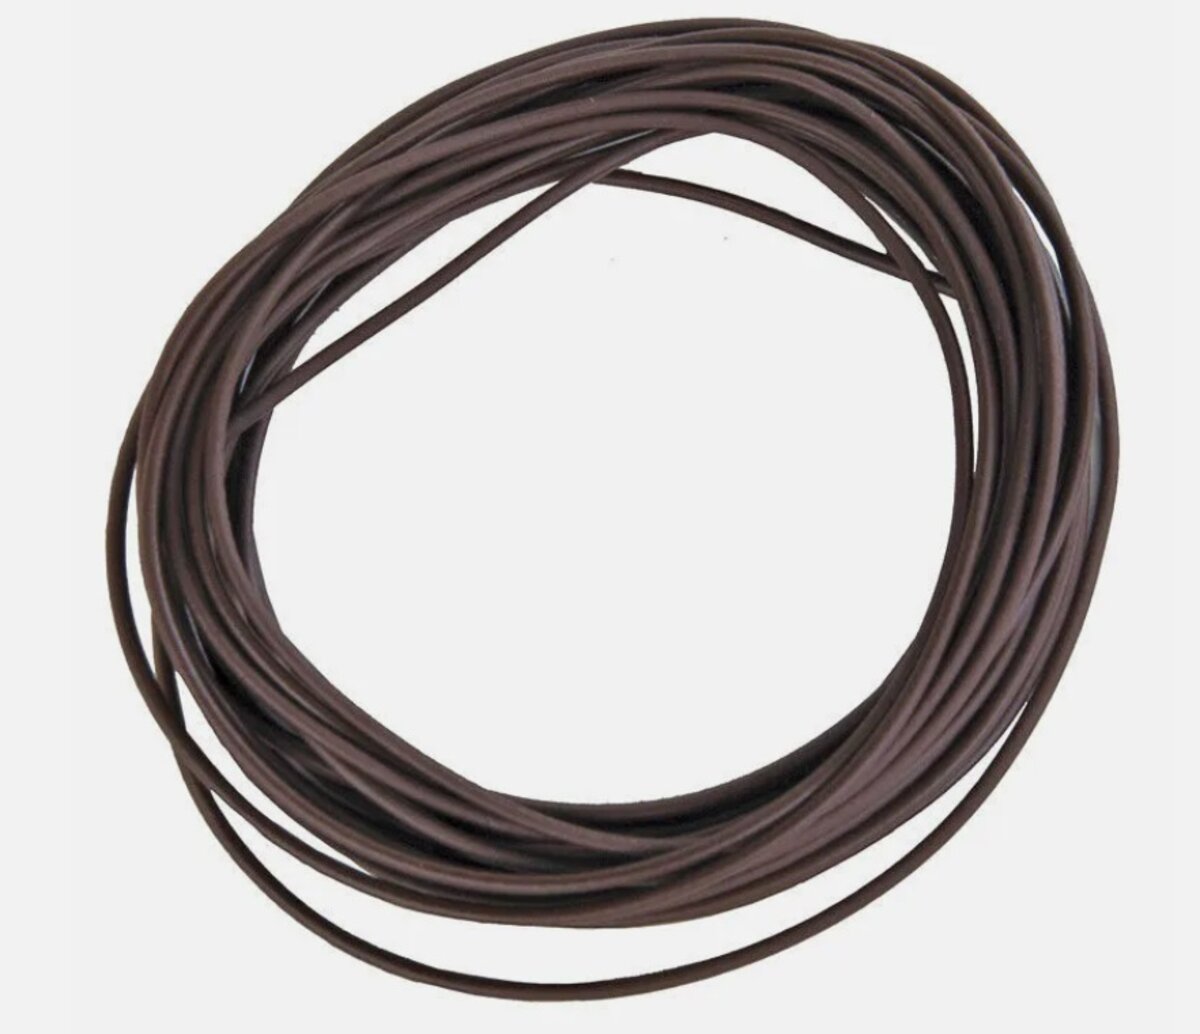 SoundTraxx 810150 Brown 10' 30 AWG Wire